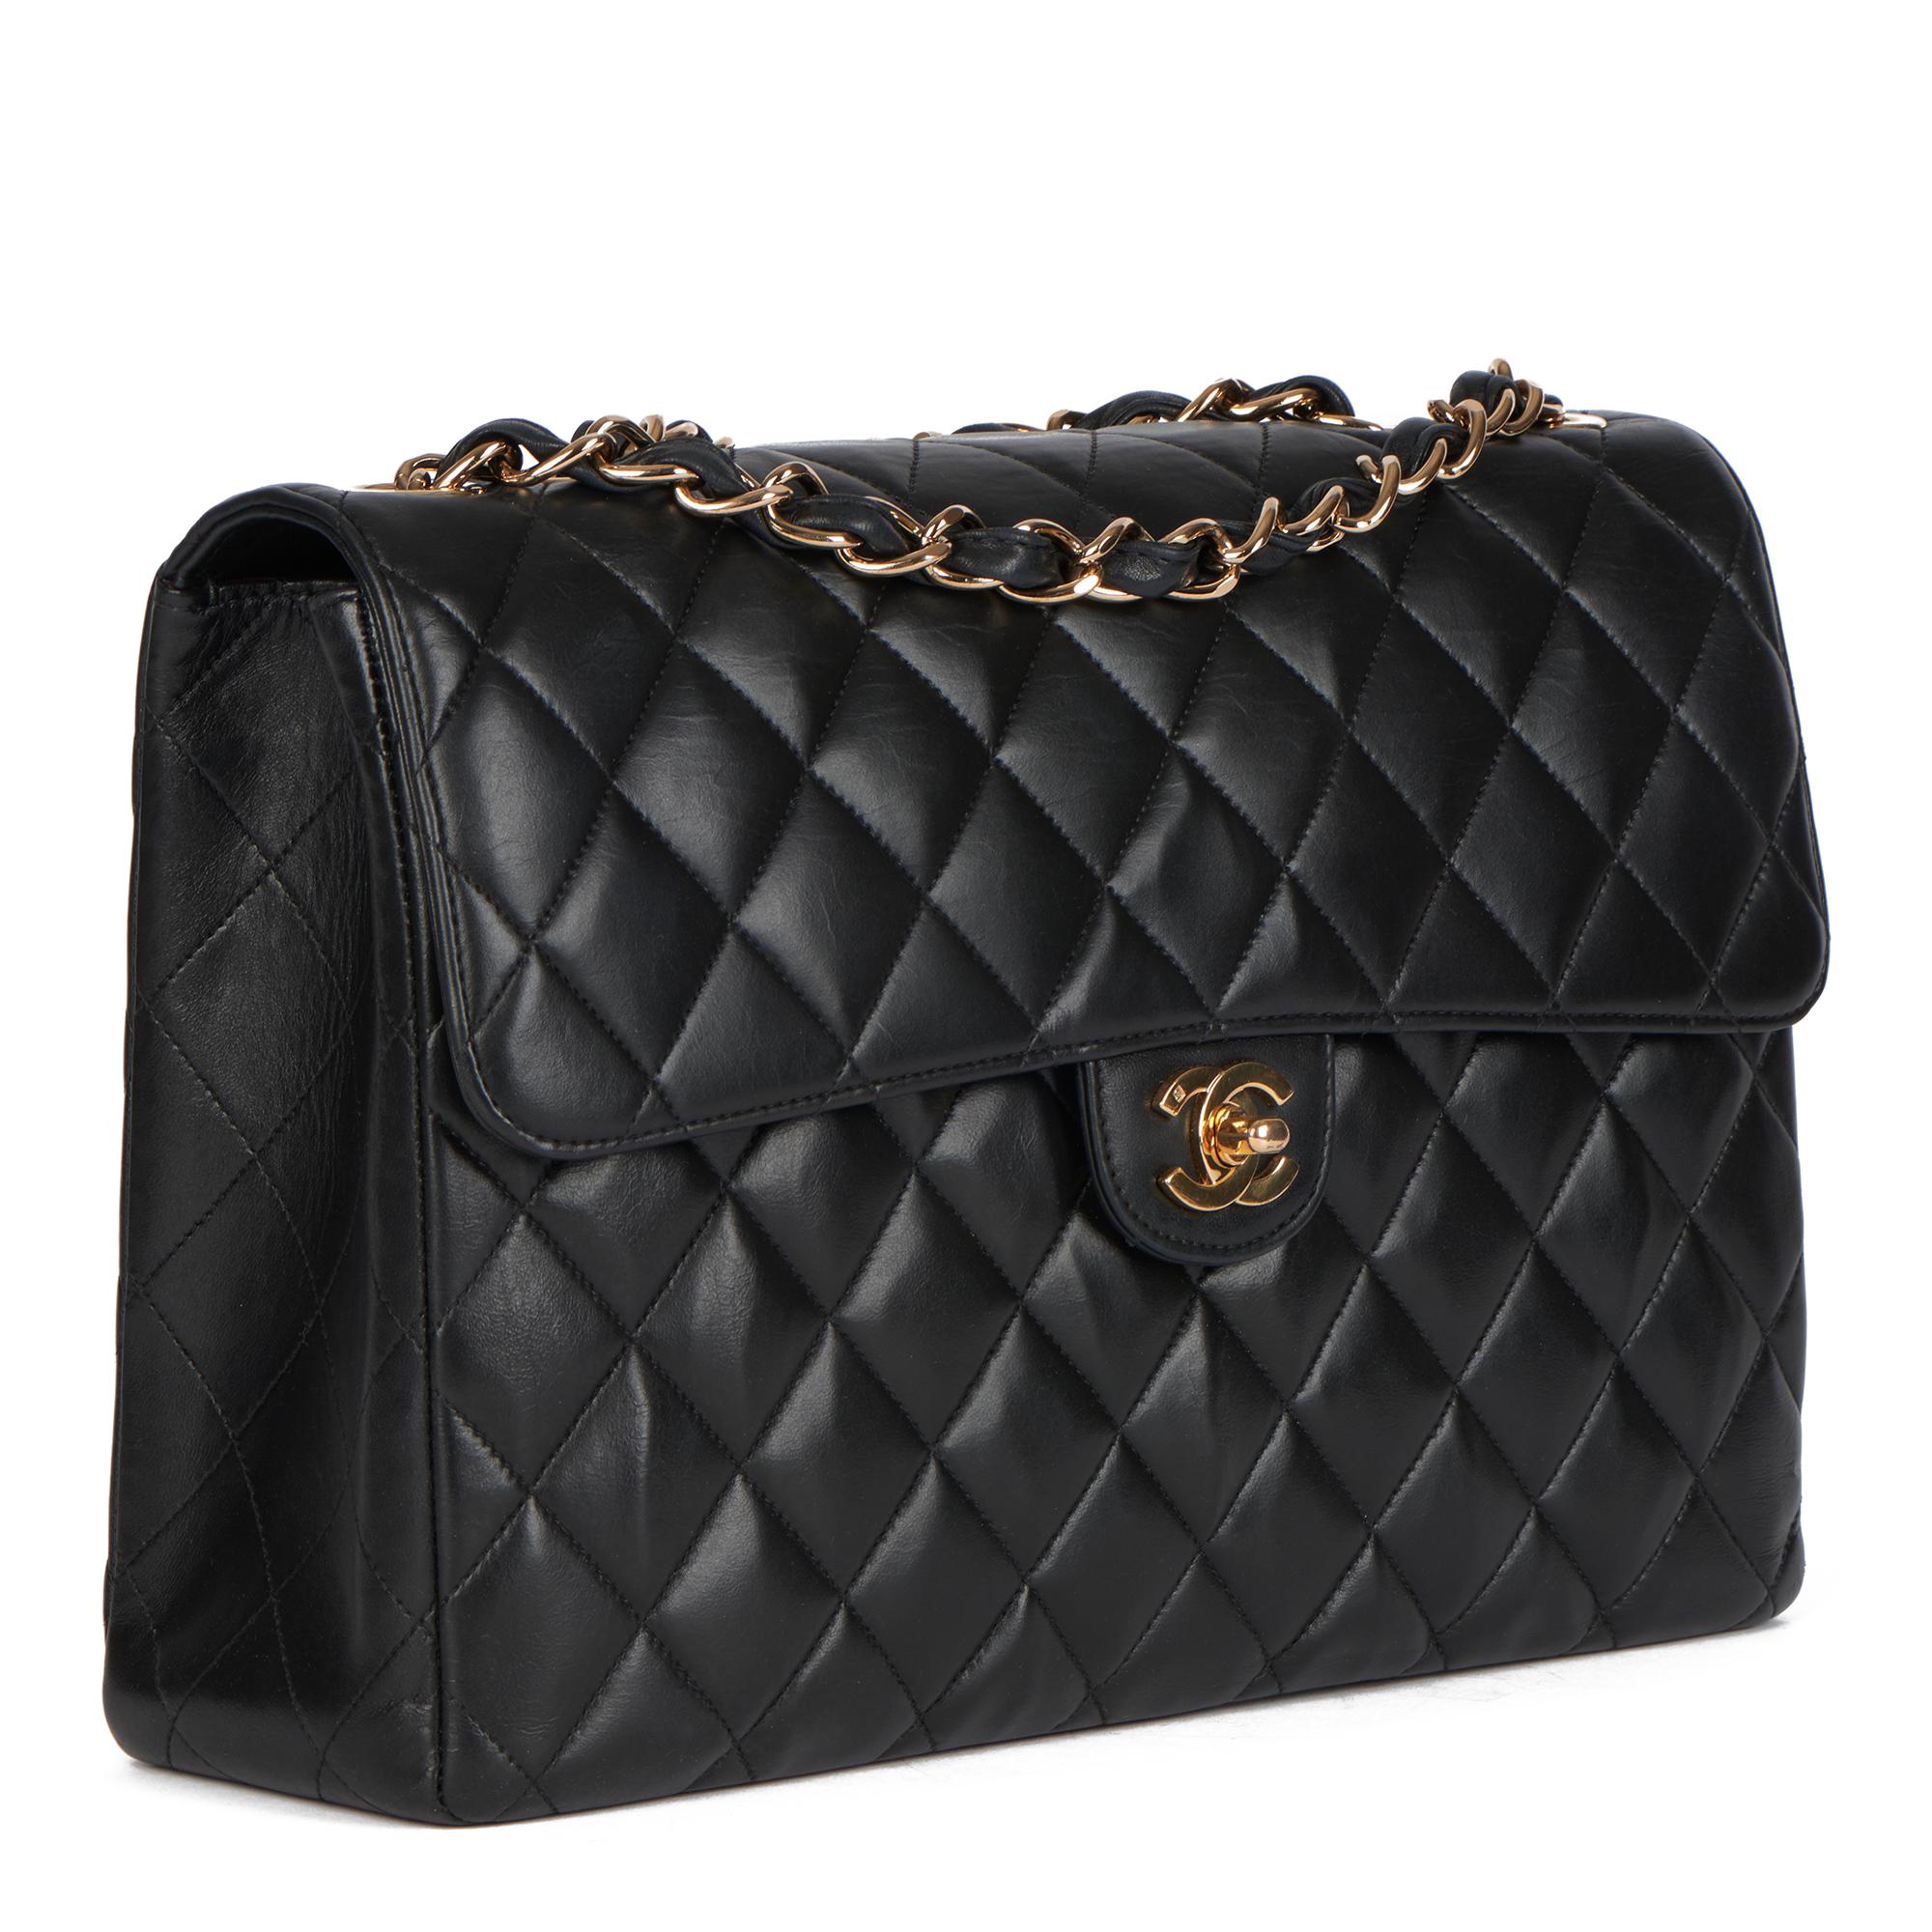 CHANEL
Black Quilted Lambskin Leather Vintage Jumbo Classic Single Flap Bag

Xupes Reference: CB328
Serial Number: 8478153
Age (Circa): 2004
Accompanied By: Dust Bag
Authenticity Details: Serial Sticker (Made in France)
Gender: Ladies
Type: